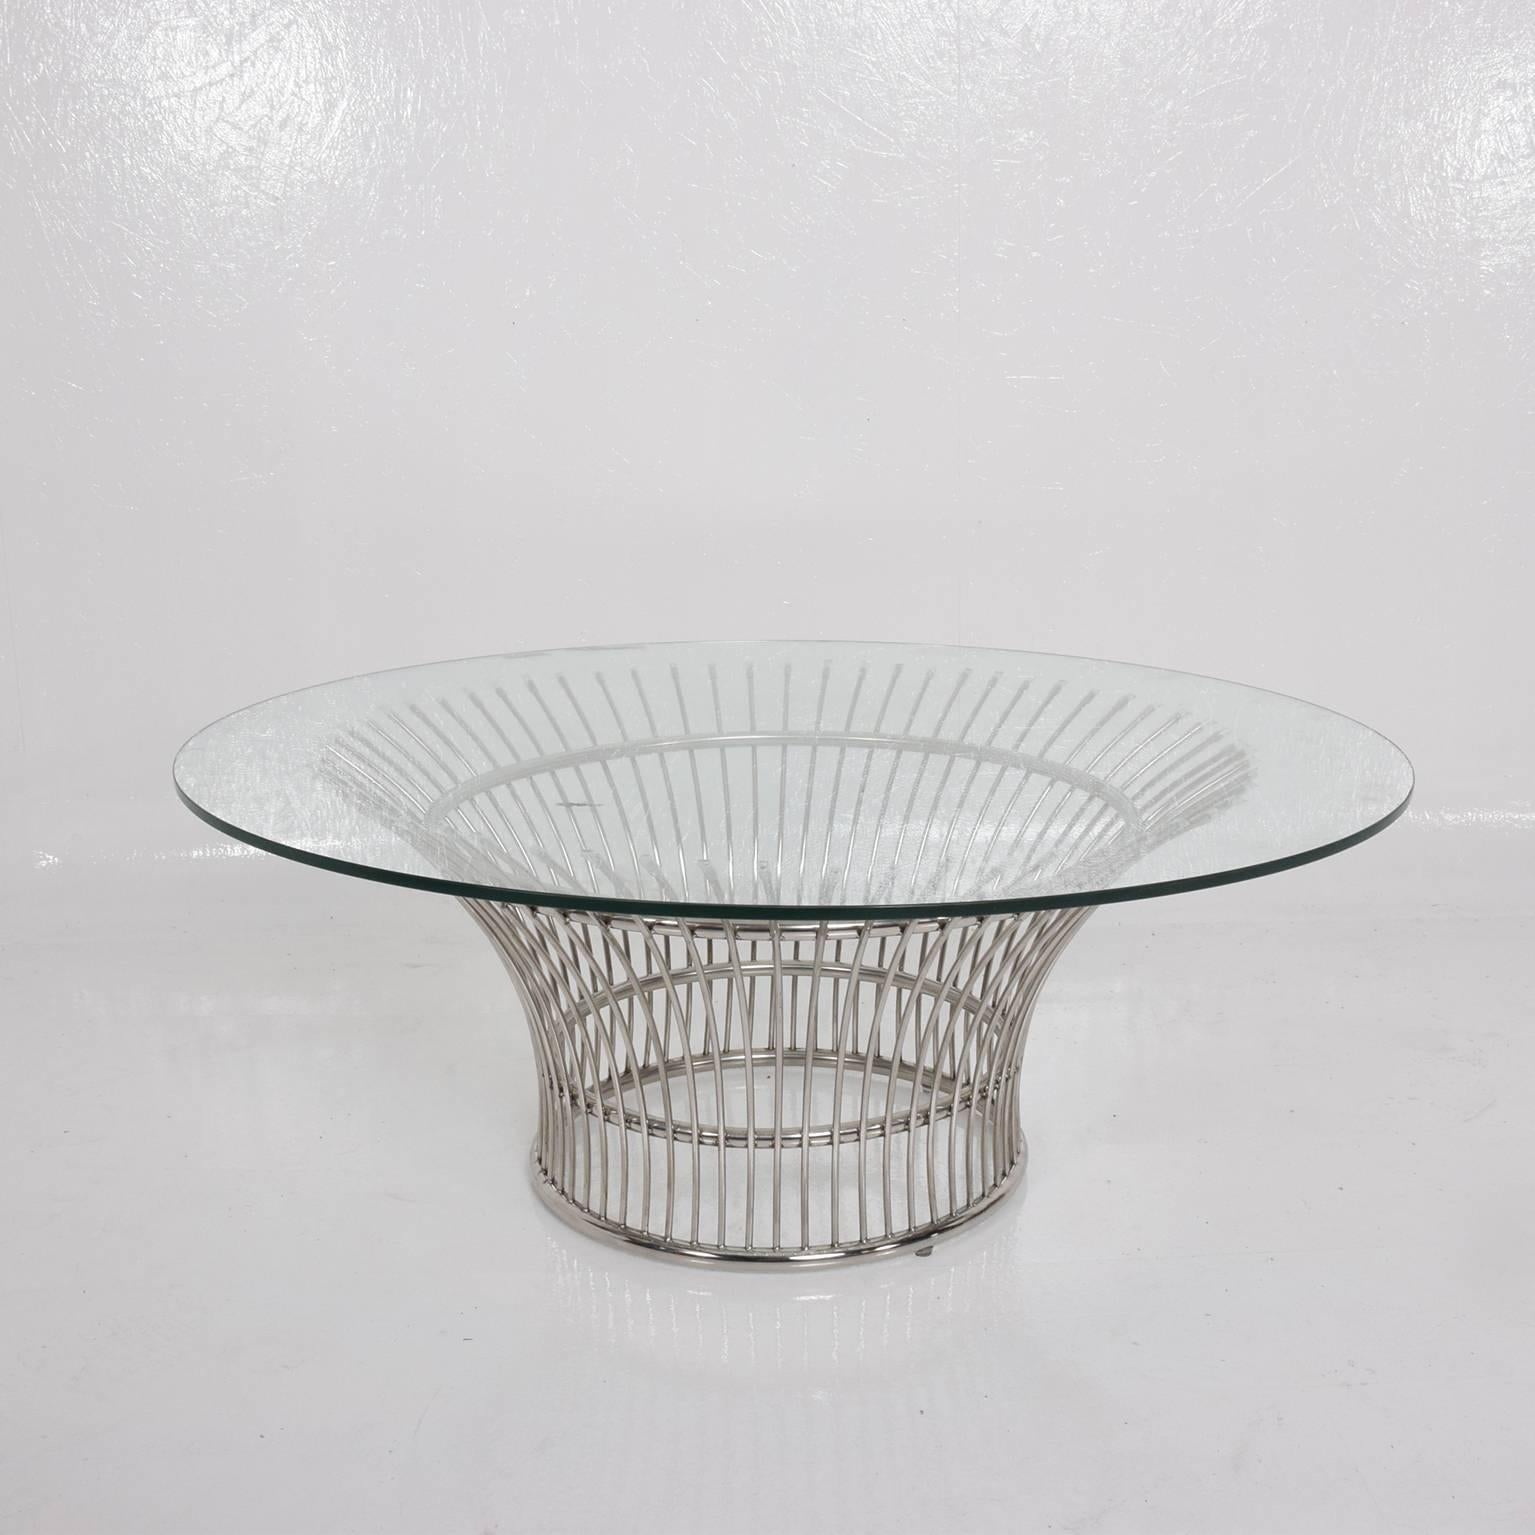 For your consideration a contemporary coffee table. Chrome-plated base in the style of Warren Platner.
Glass top in circular shape. 

No label or markings from the maker. 
Dimensions: 40